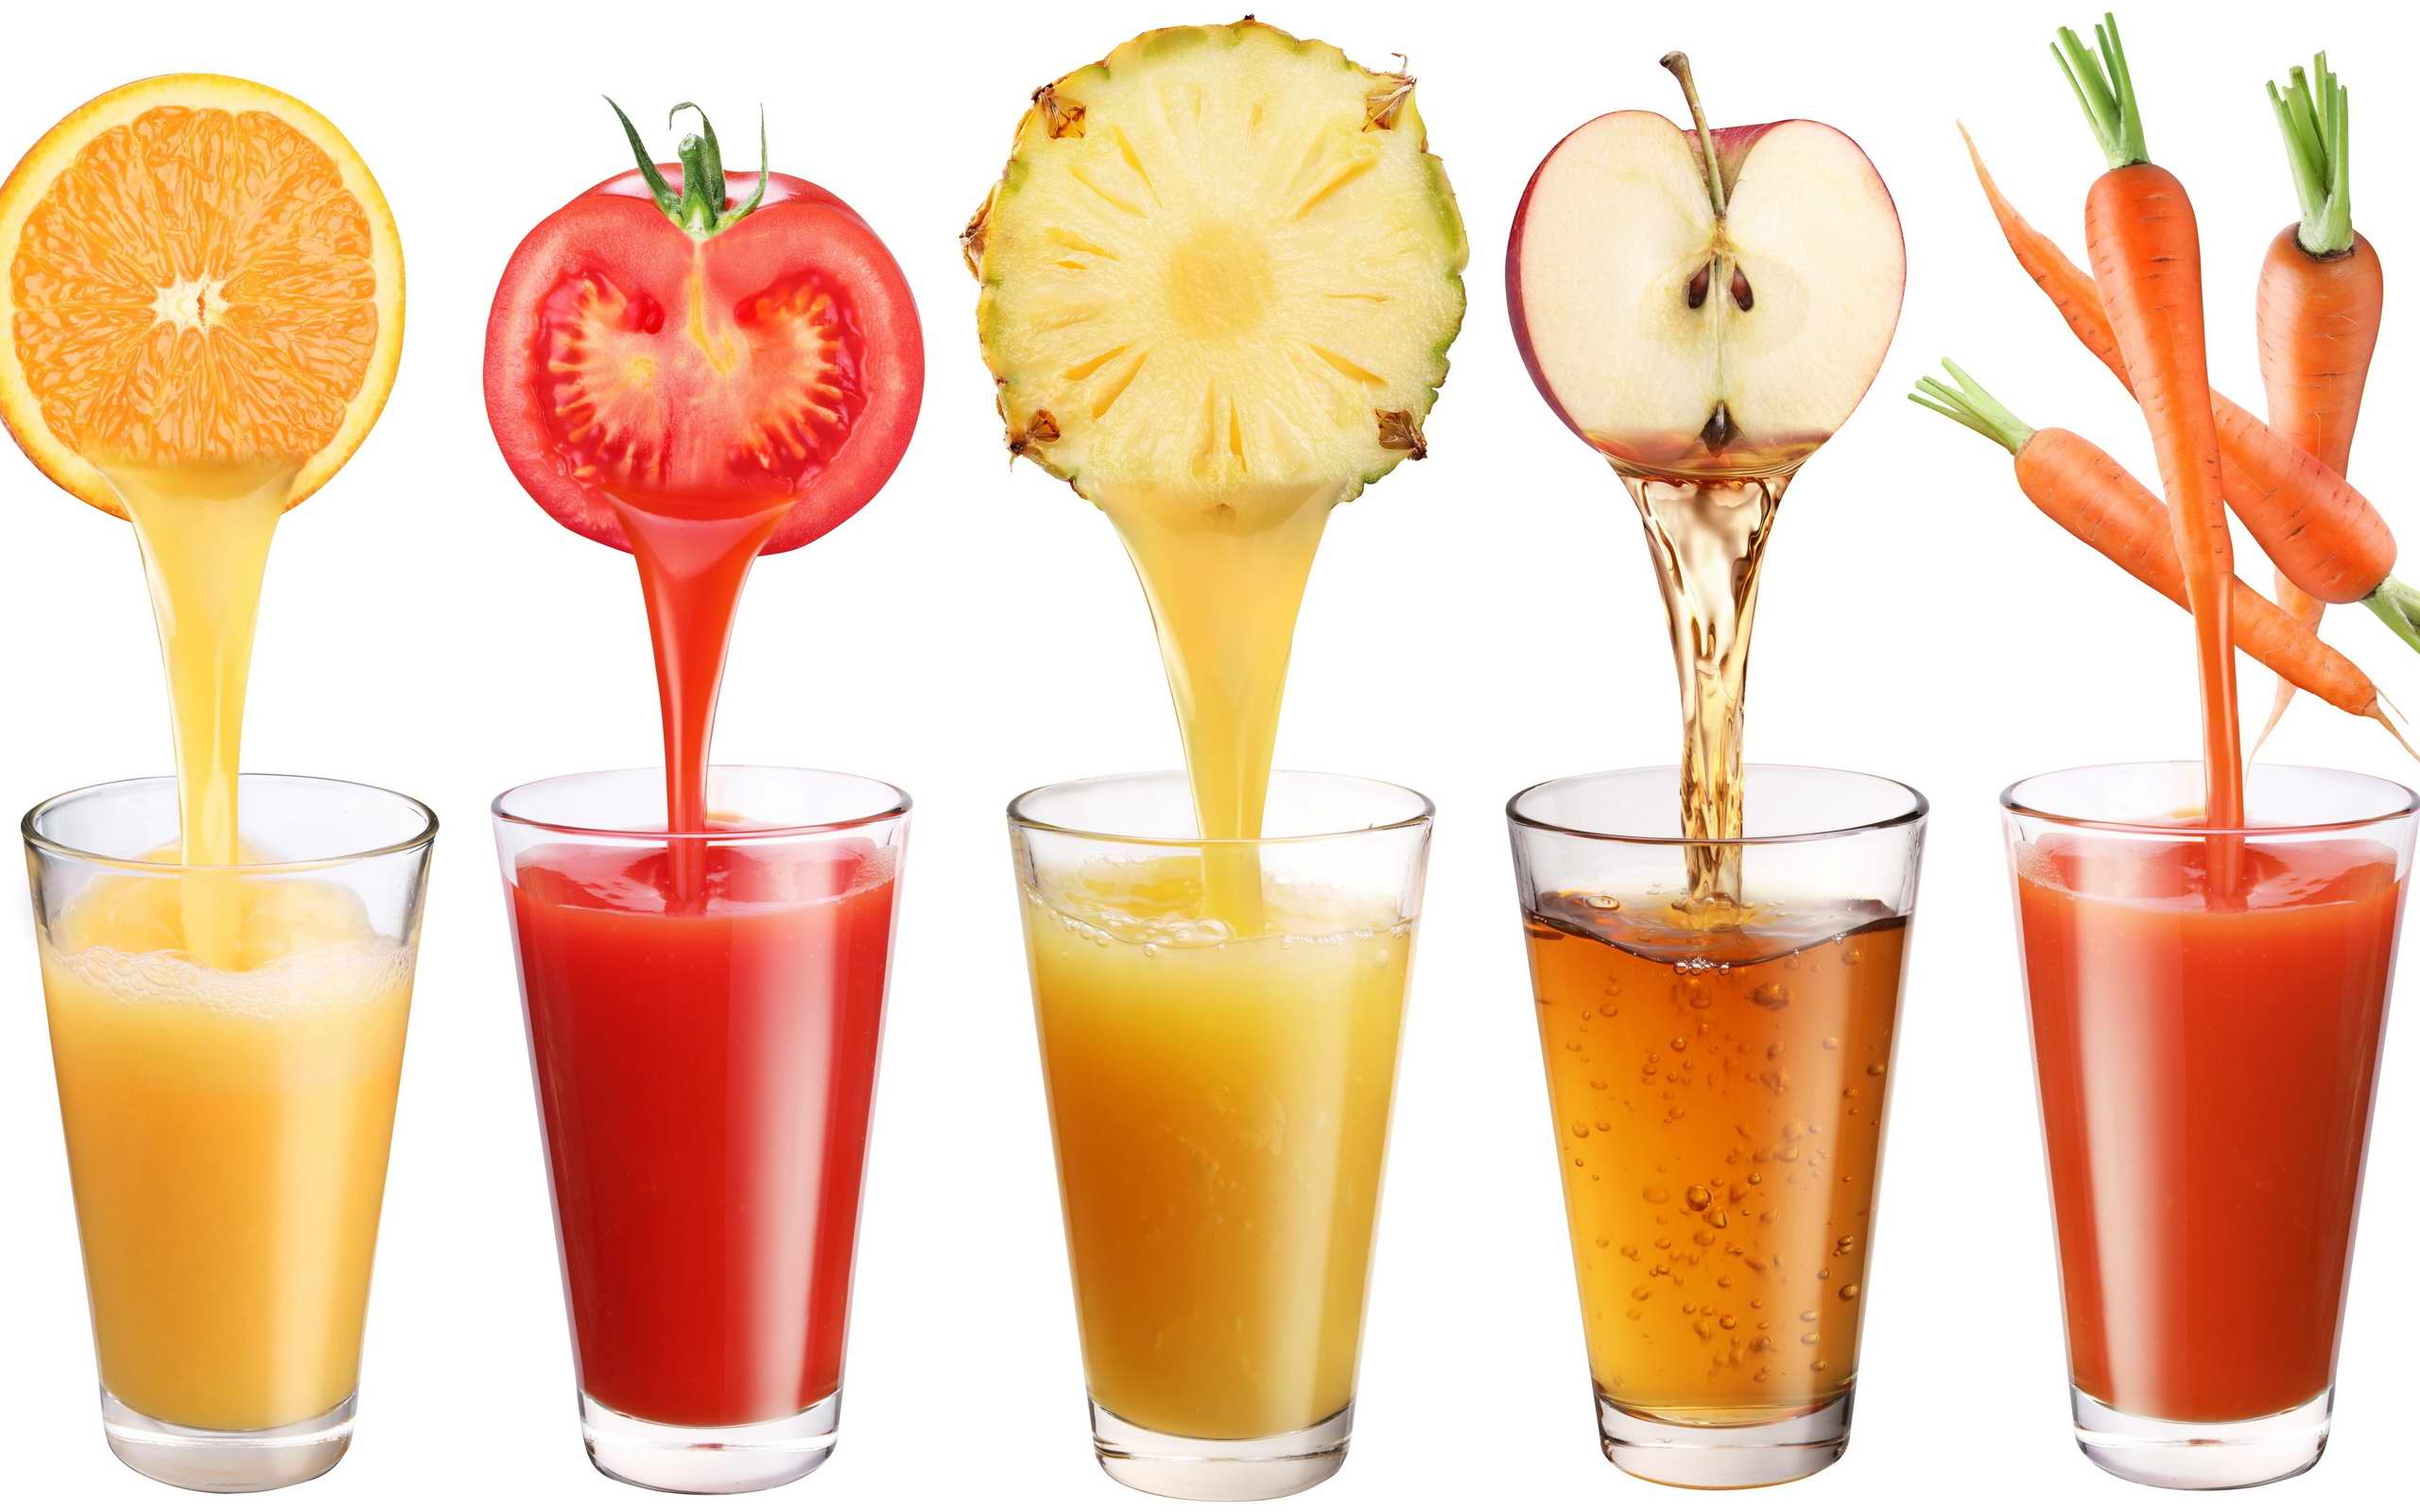 Fresh Squeezed Juice For Your Health Drink Your Fruit And Veggies